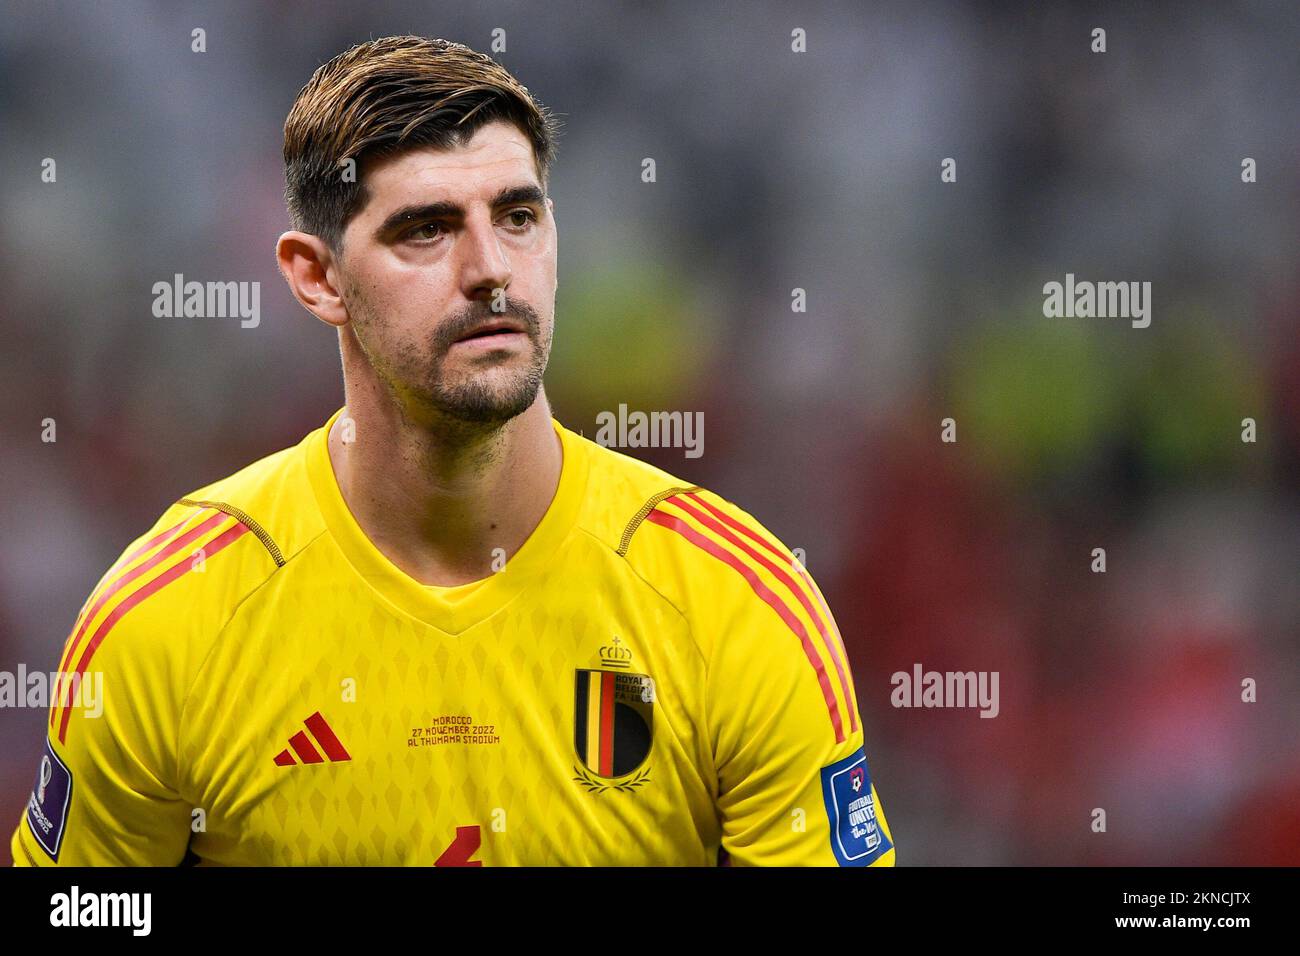 DOHA, QATAR - NOVEMBER 27: Thibaut Courtois of Belgium looks on during the Group F - FIFA World Cup Qatar 2022 match between Belgium and Morocco at the Al Thumama Stadium on November 27, 2022 in Doha, Qatar (Photo by Pablo Morano/BSR Agency) Stock Photo